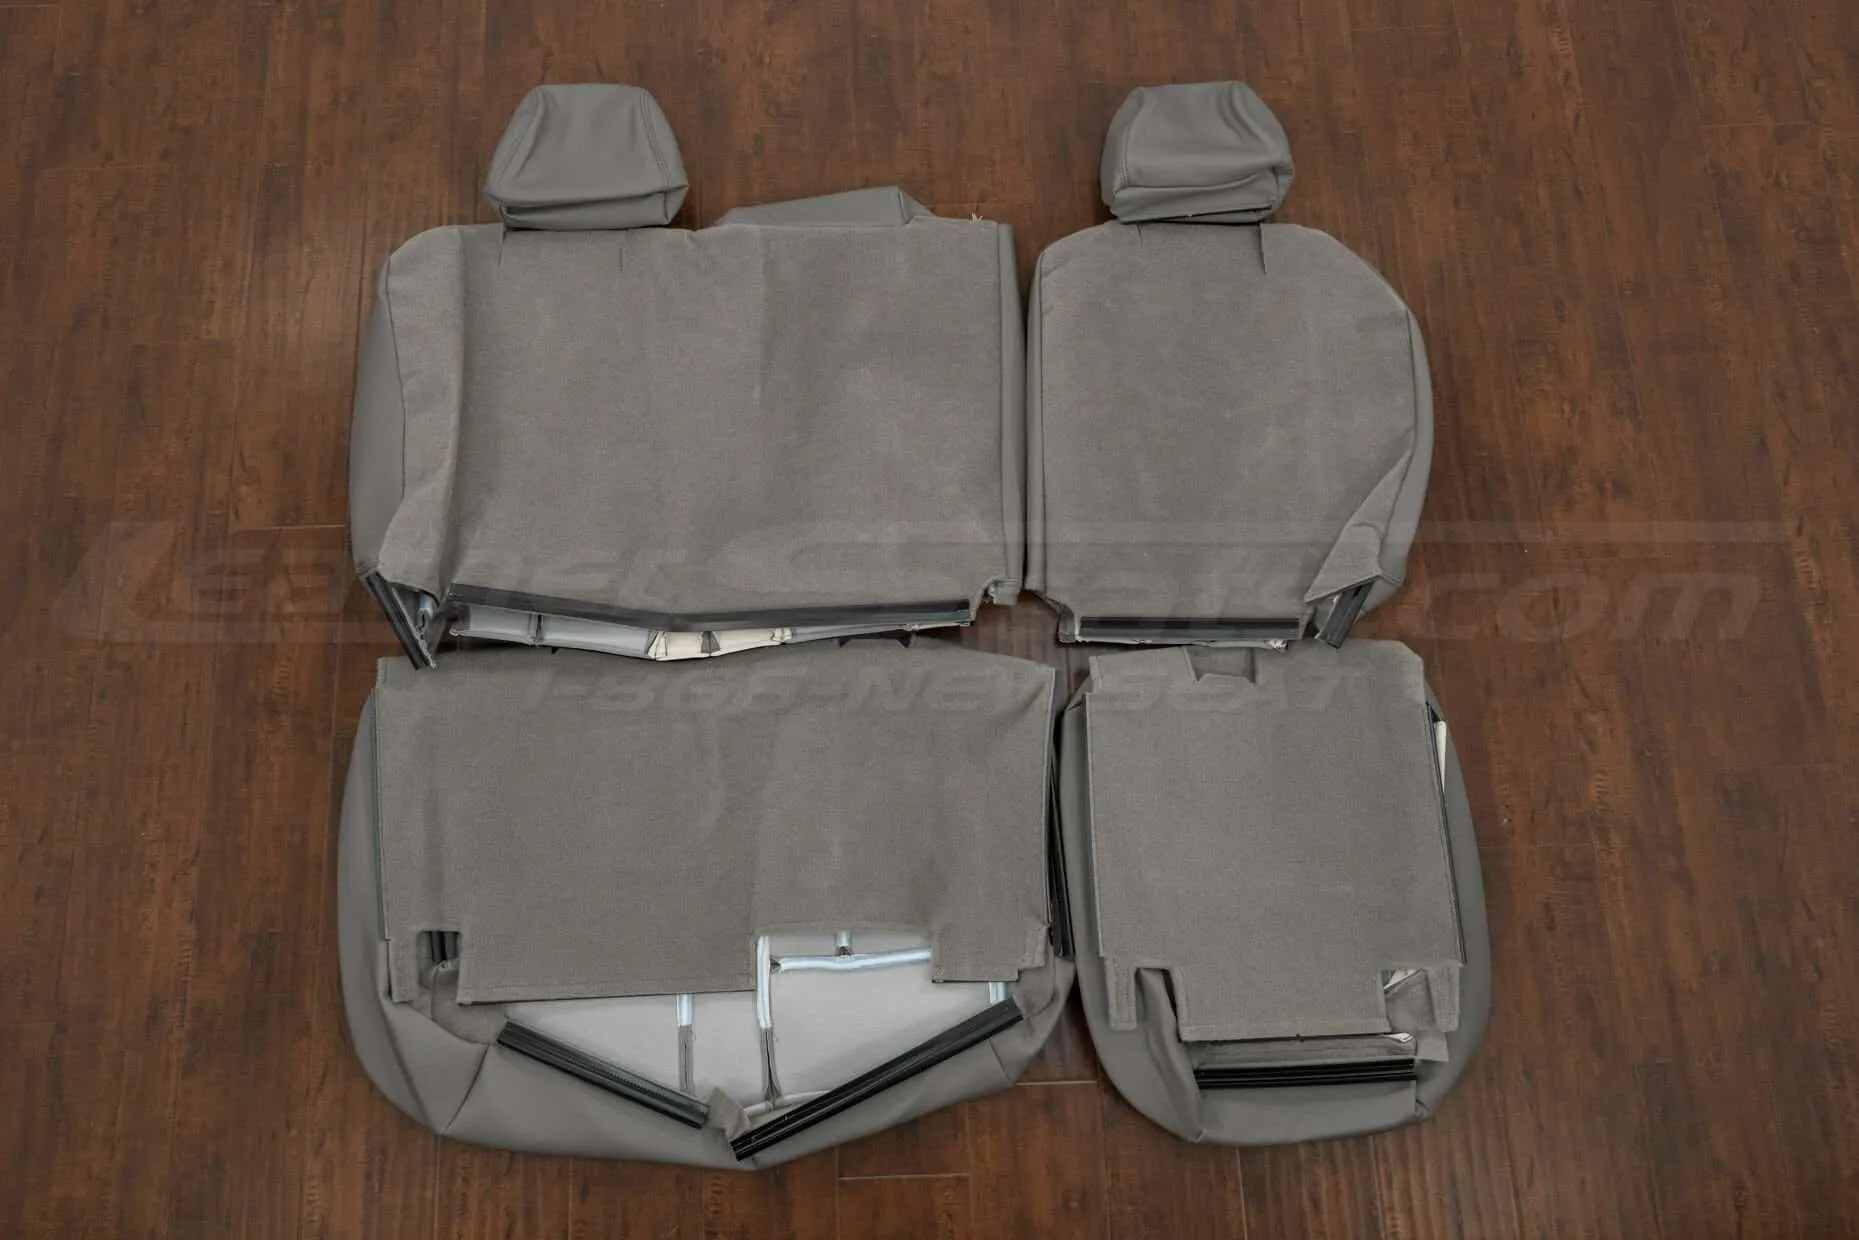 Rear seat upholstery flipped